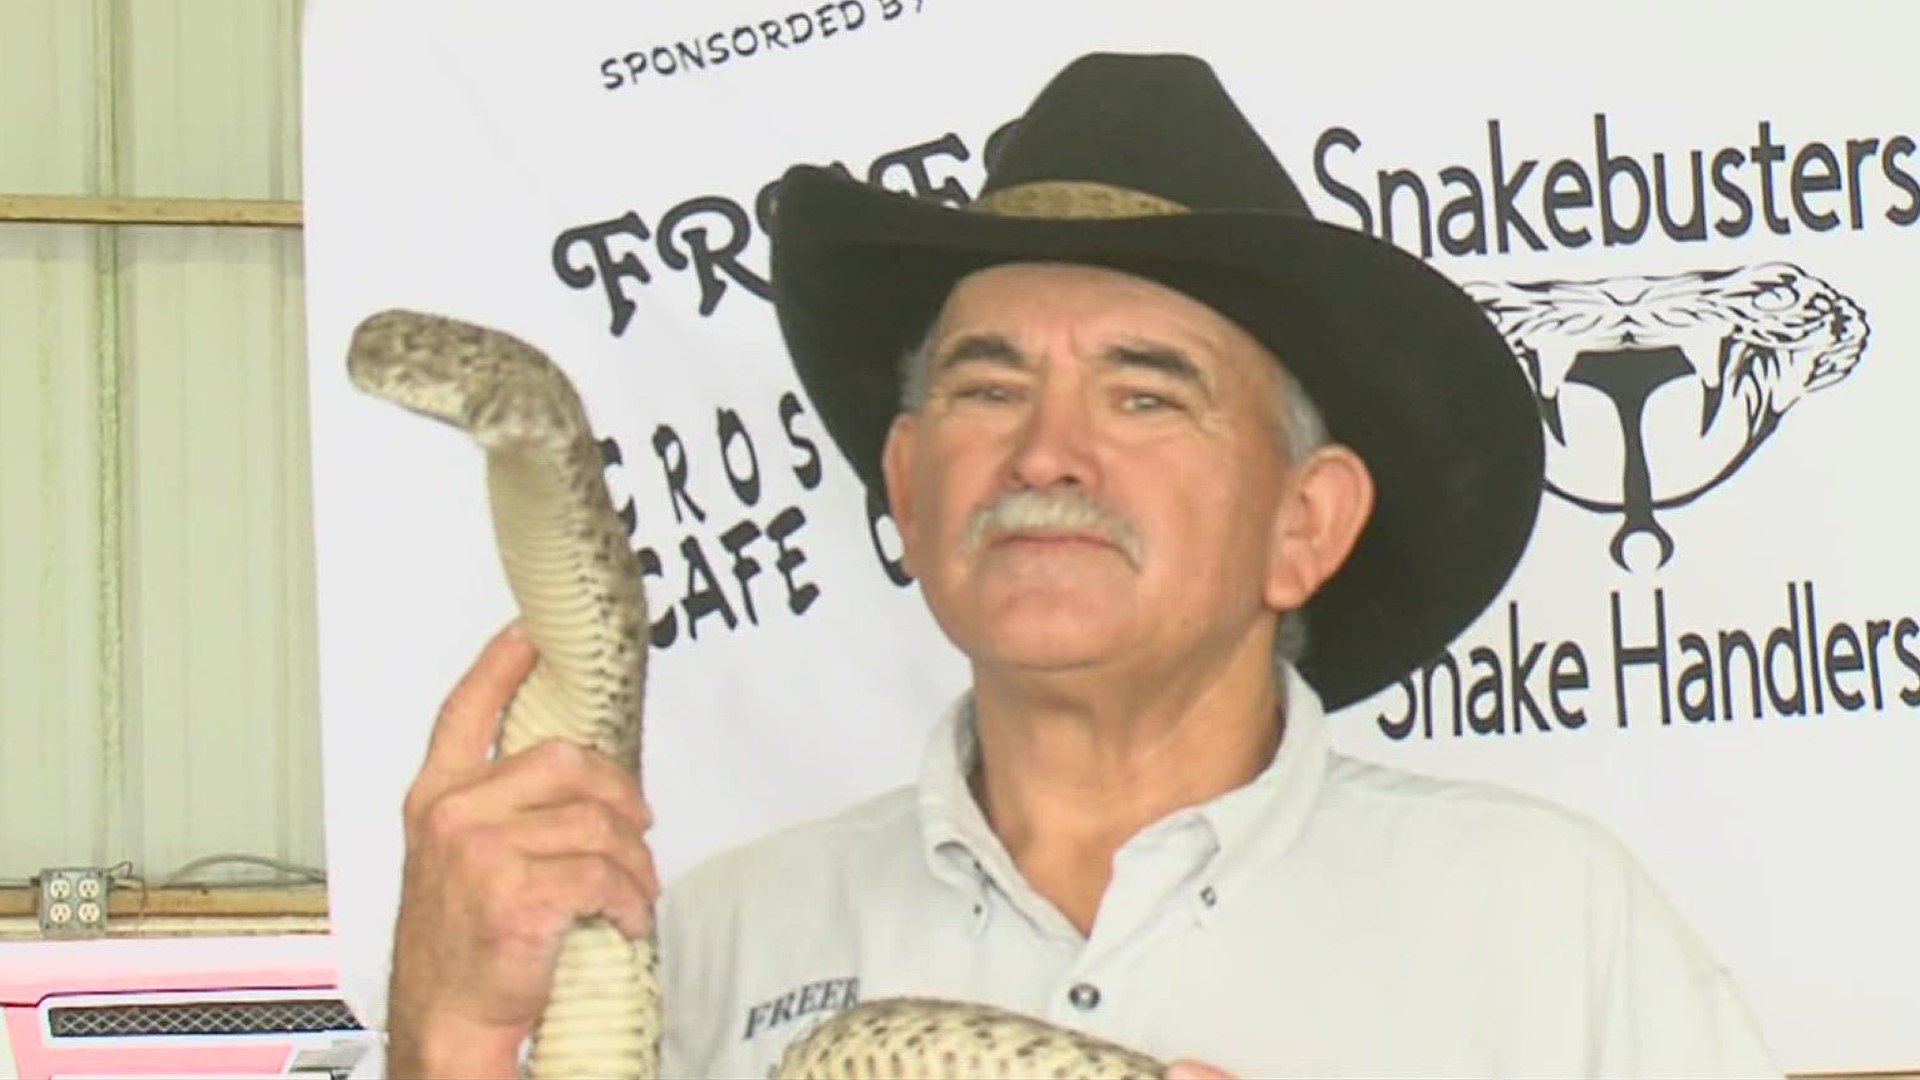 Eugene De Leon Sr. died around 9 p.m. Saturday night, approximately 8 hours after he was bitten by a rattlesnake at a city event in Freer.